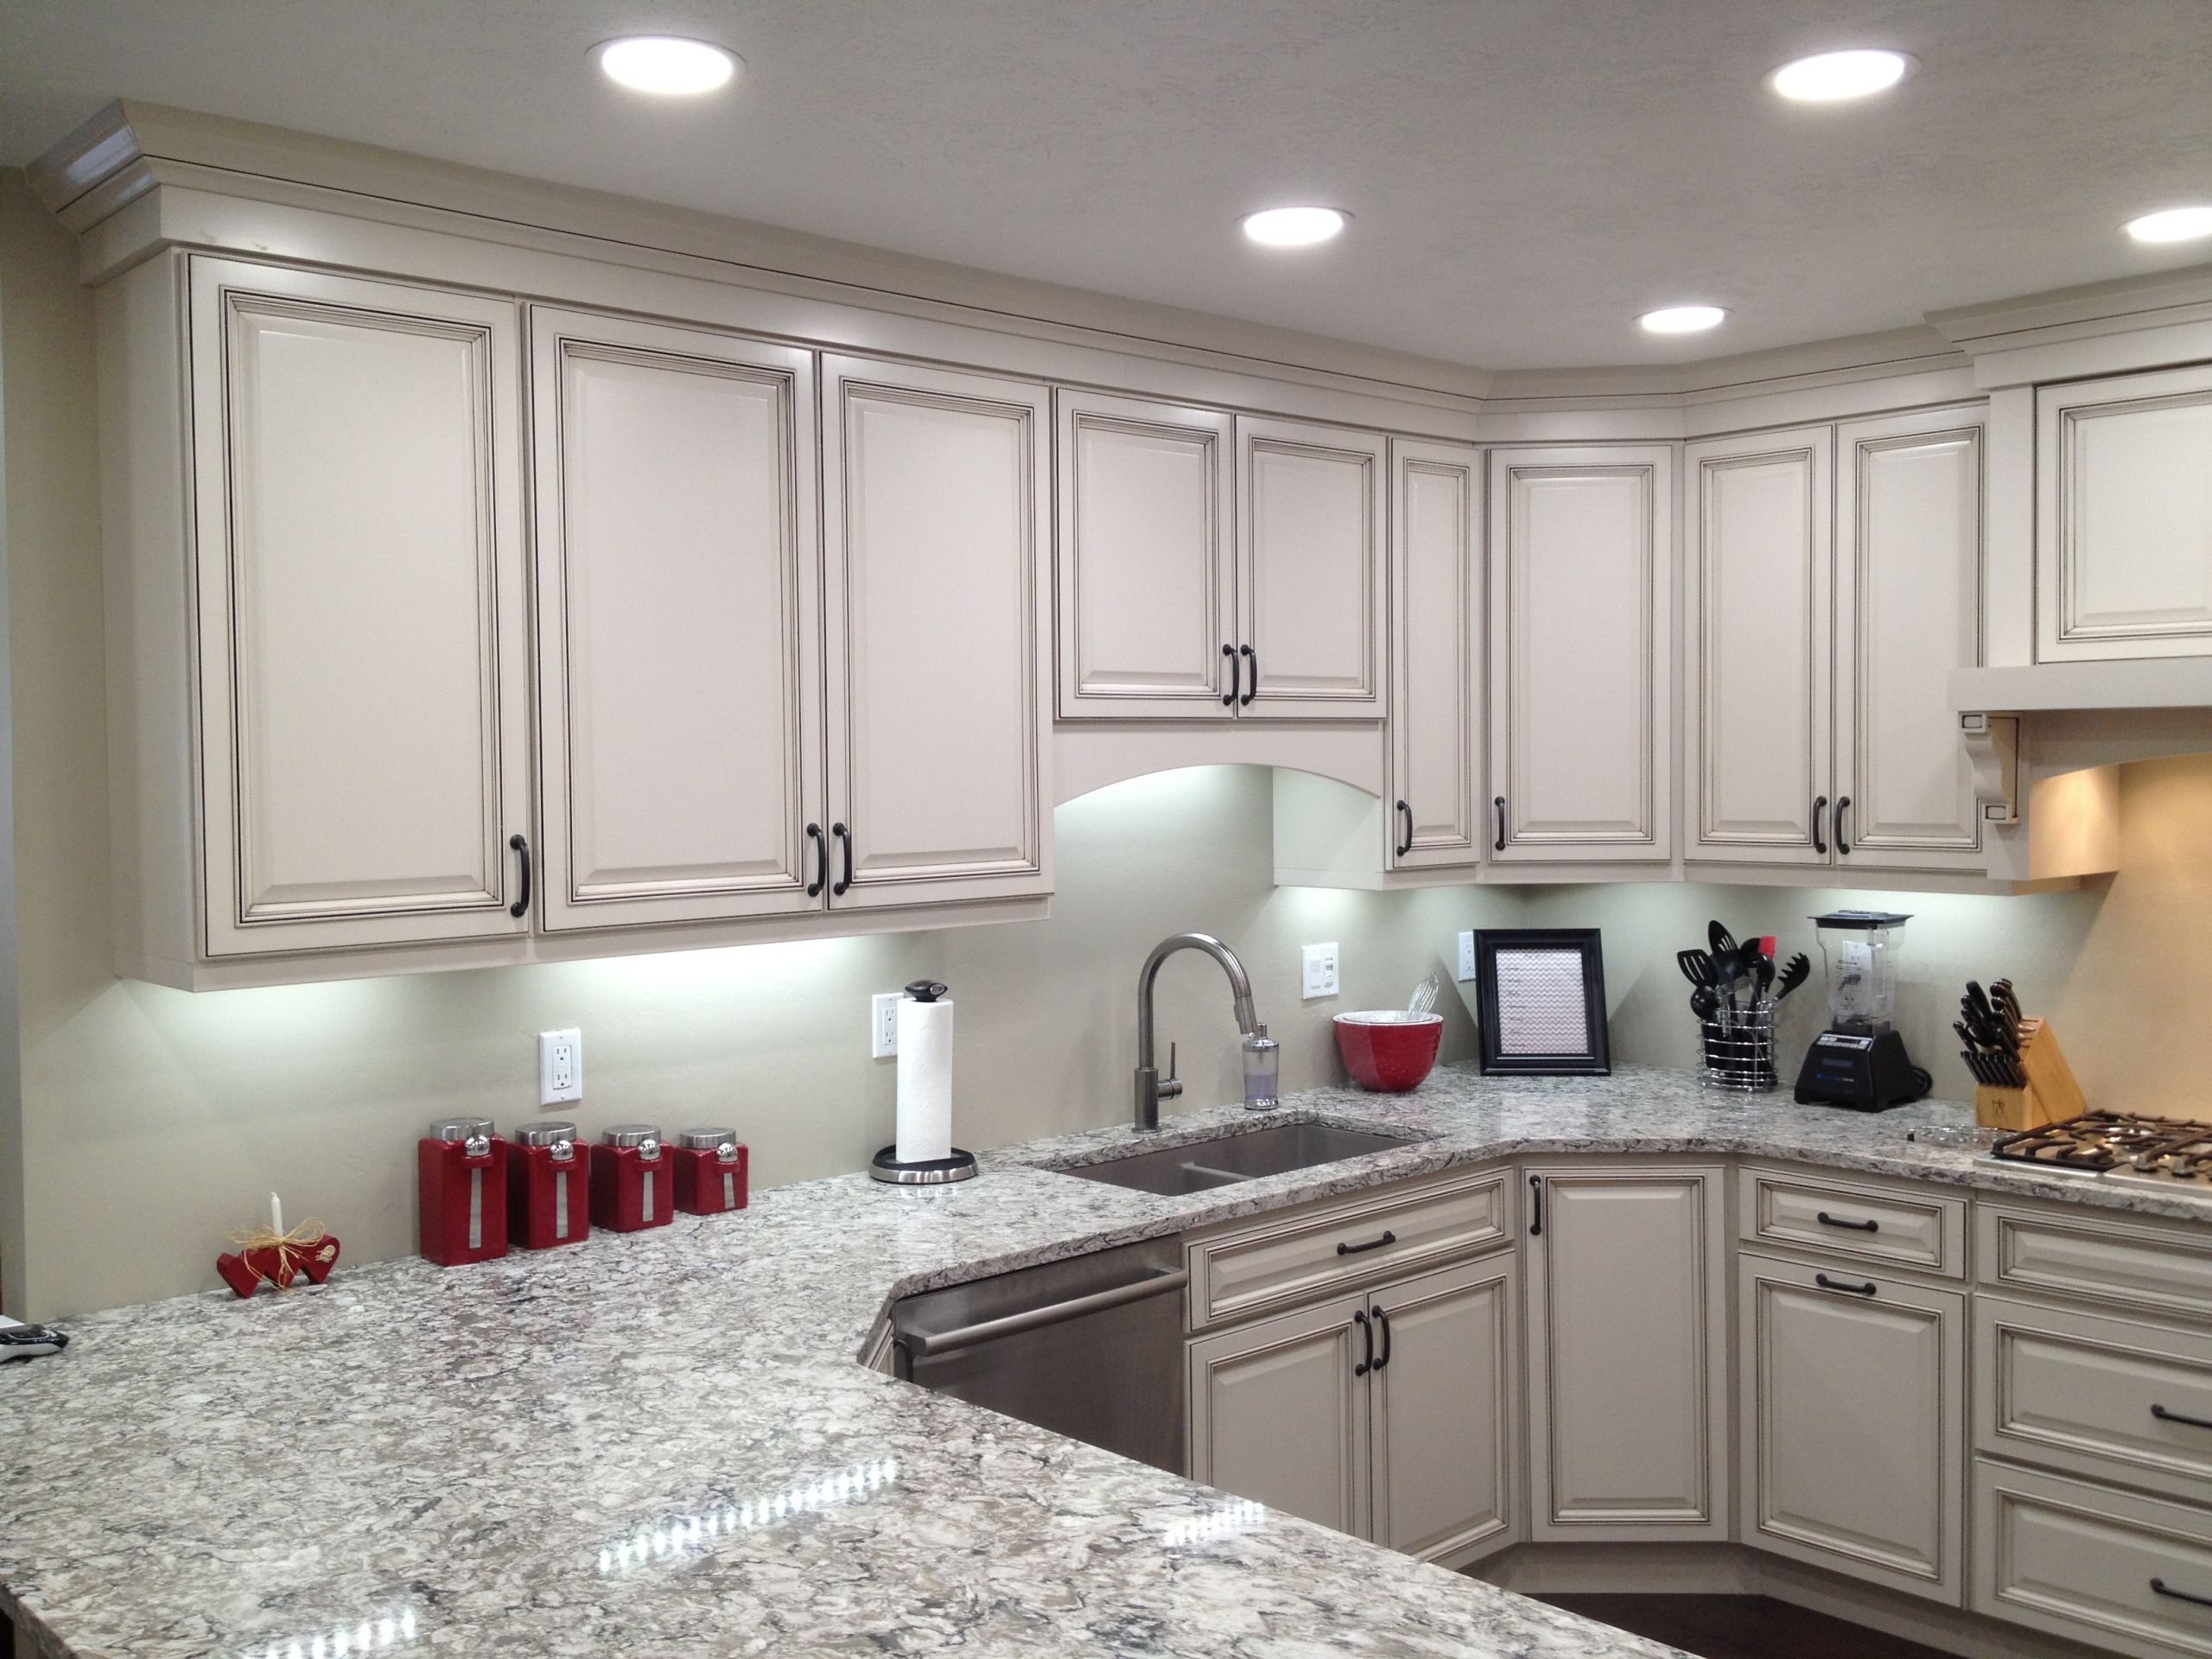 Under The Kitchen Cabinet Lighting
 Look to LEDs when Upgrading Lighting